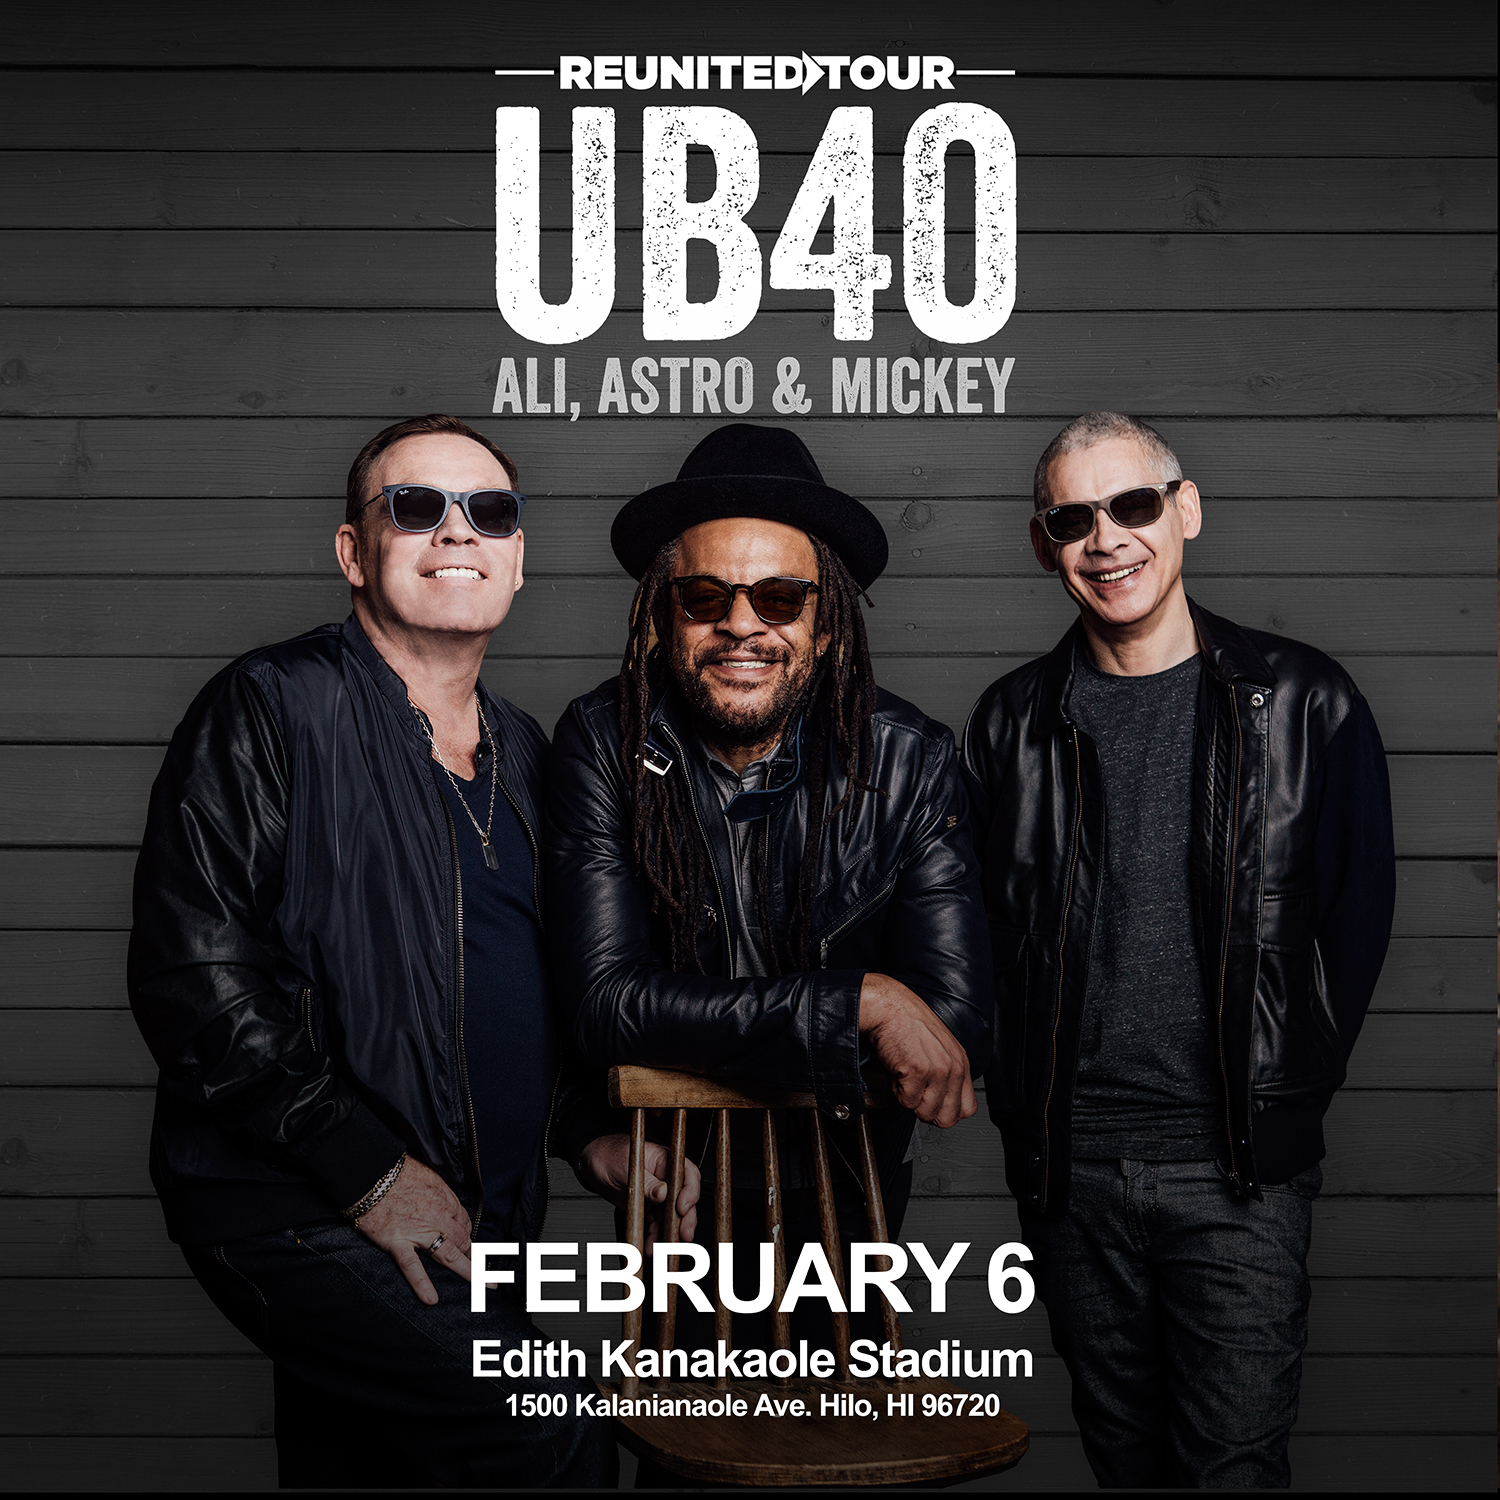 is ub40 tour still going ahead